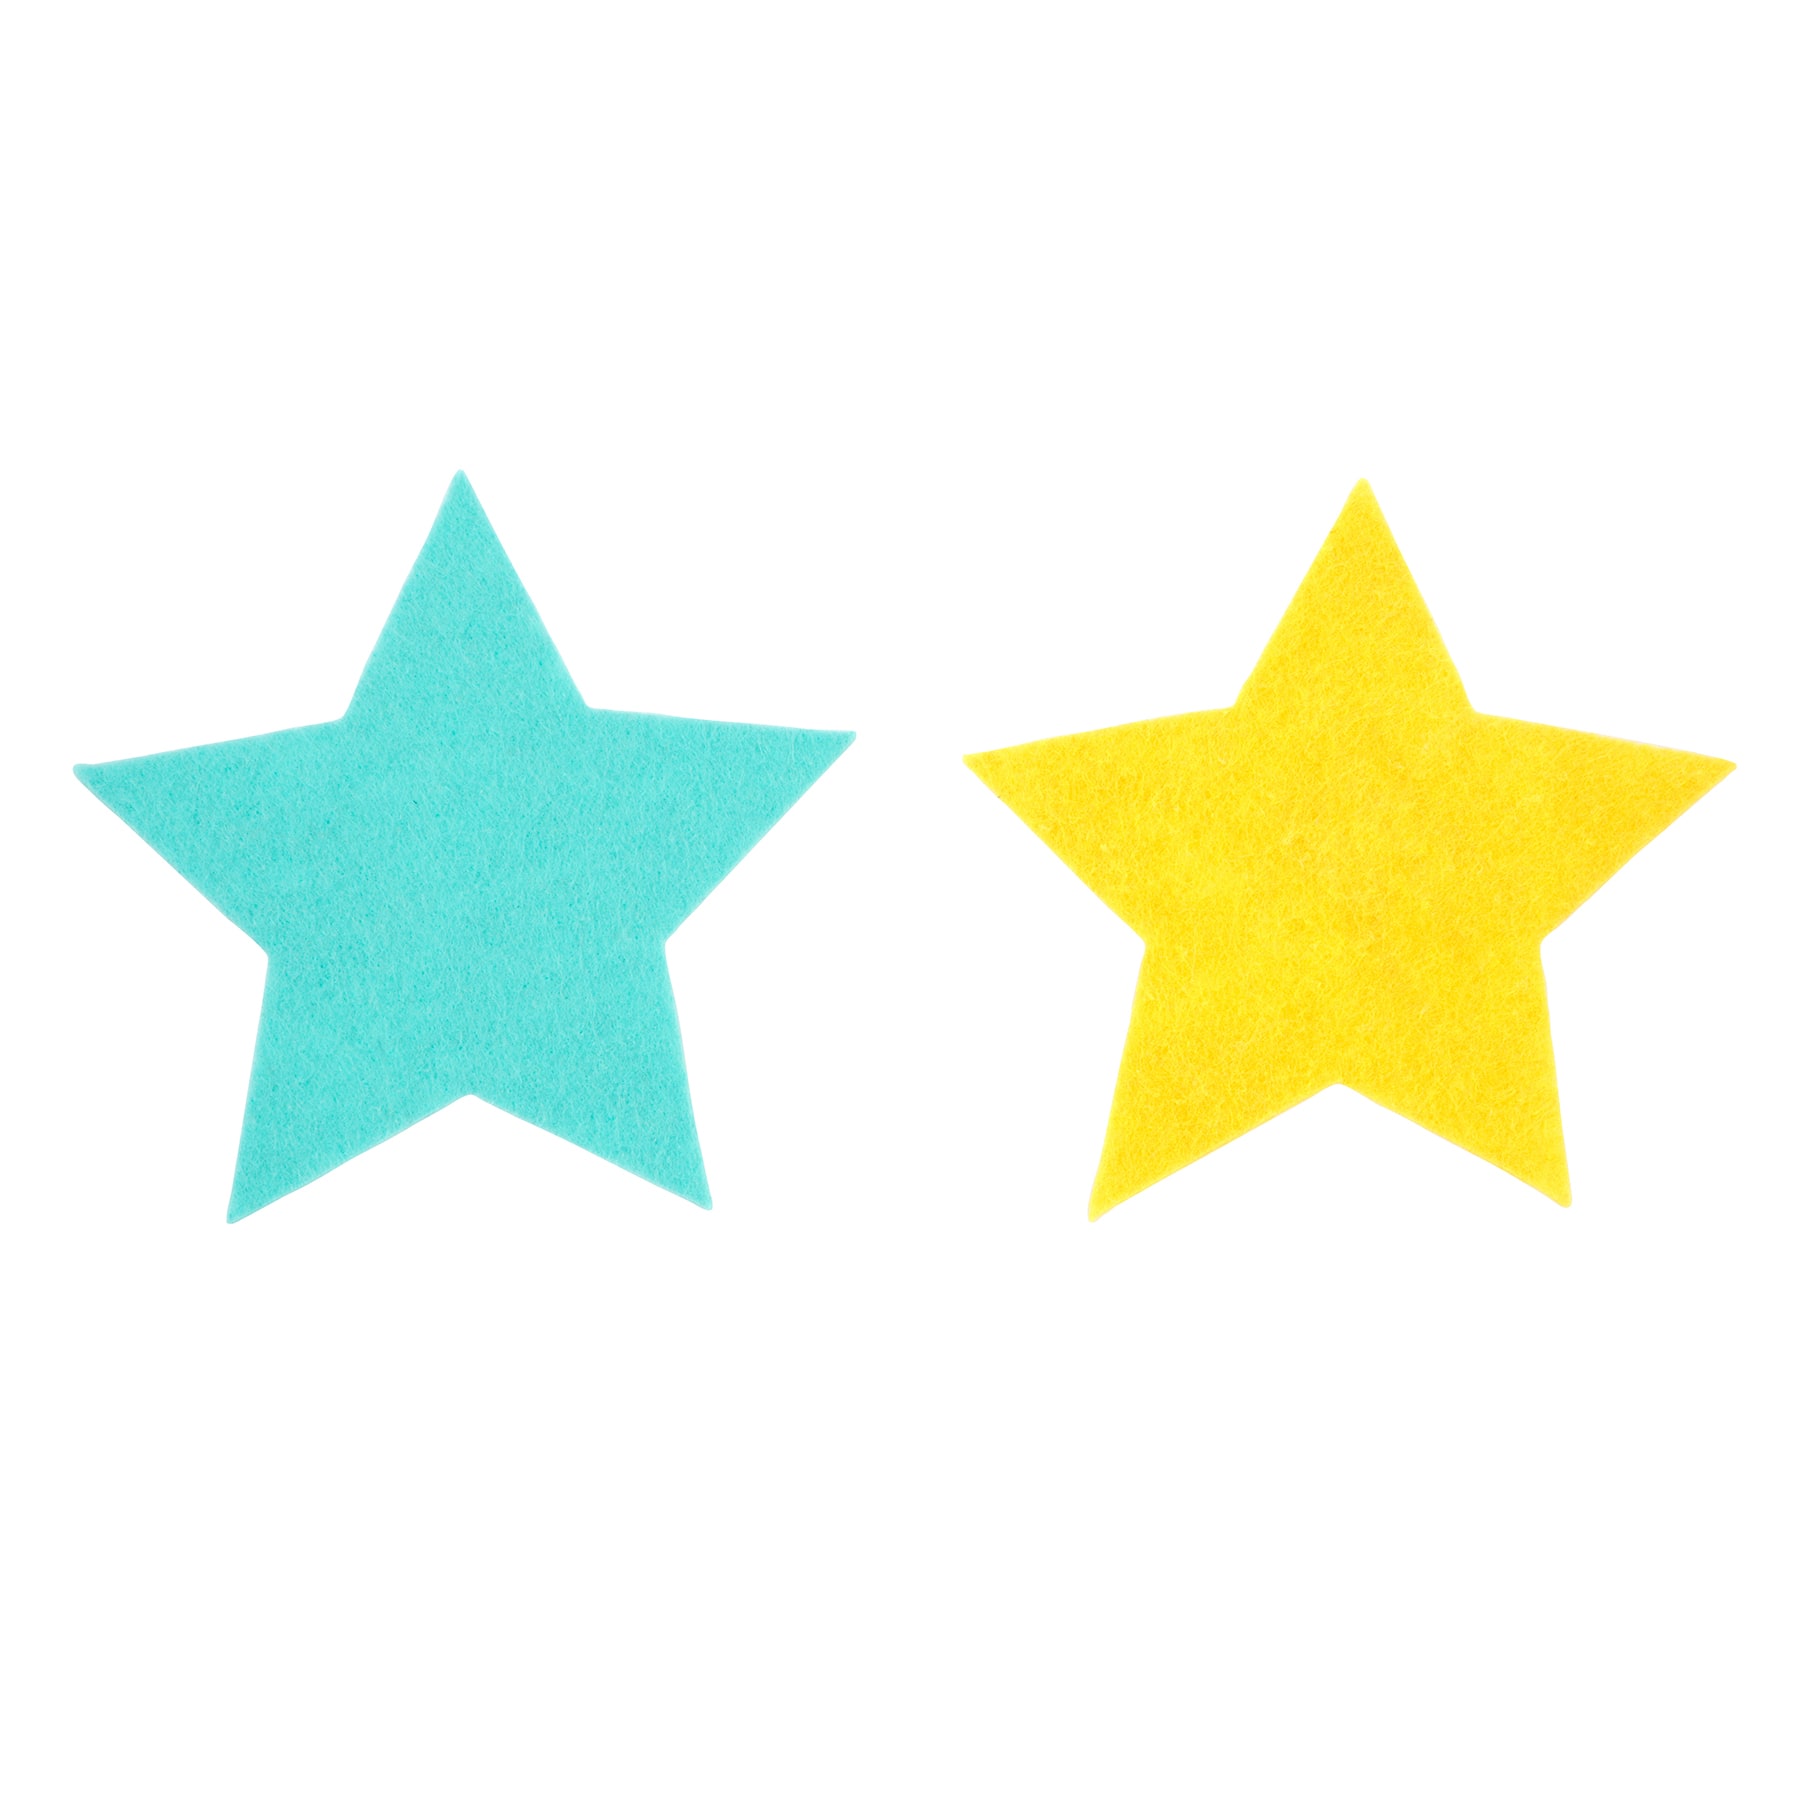 12 Packs: 15 ct. (180 total) Blue &#x26; Yellow Star Felt Shapes by Creatology&#x2122;